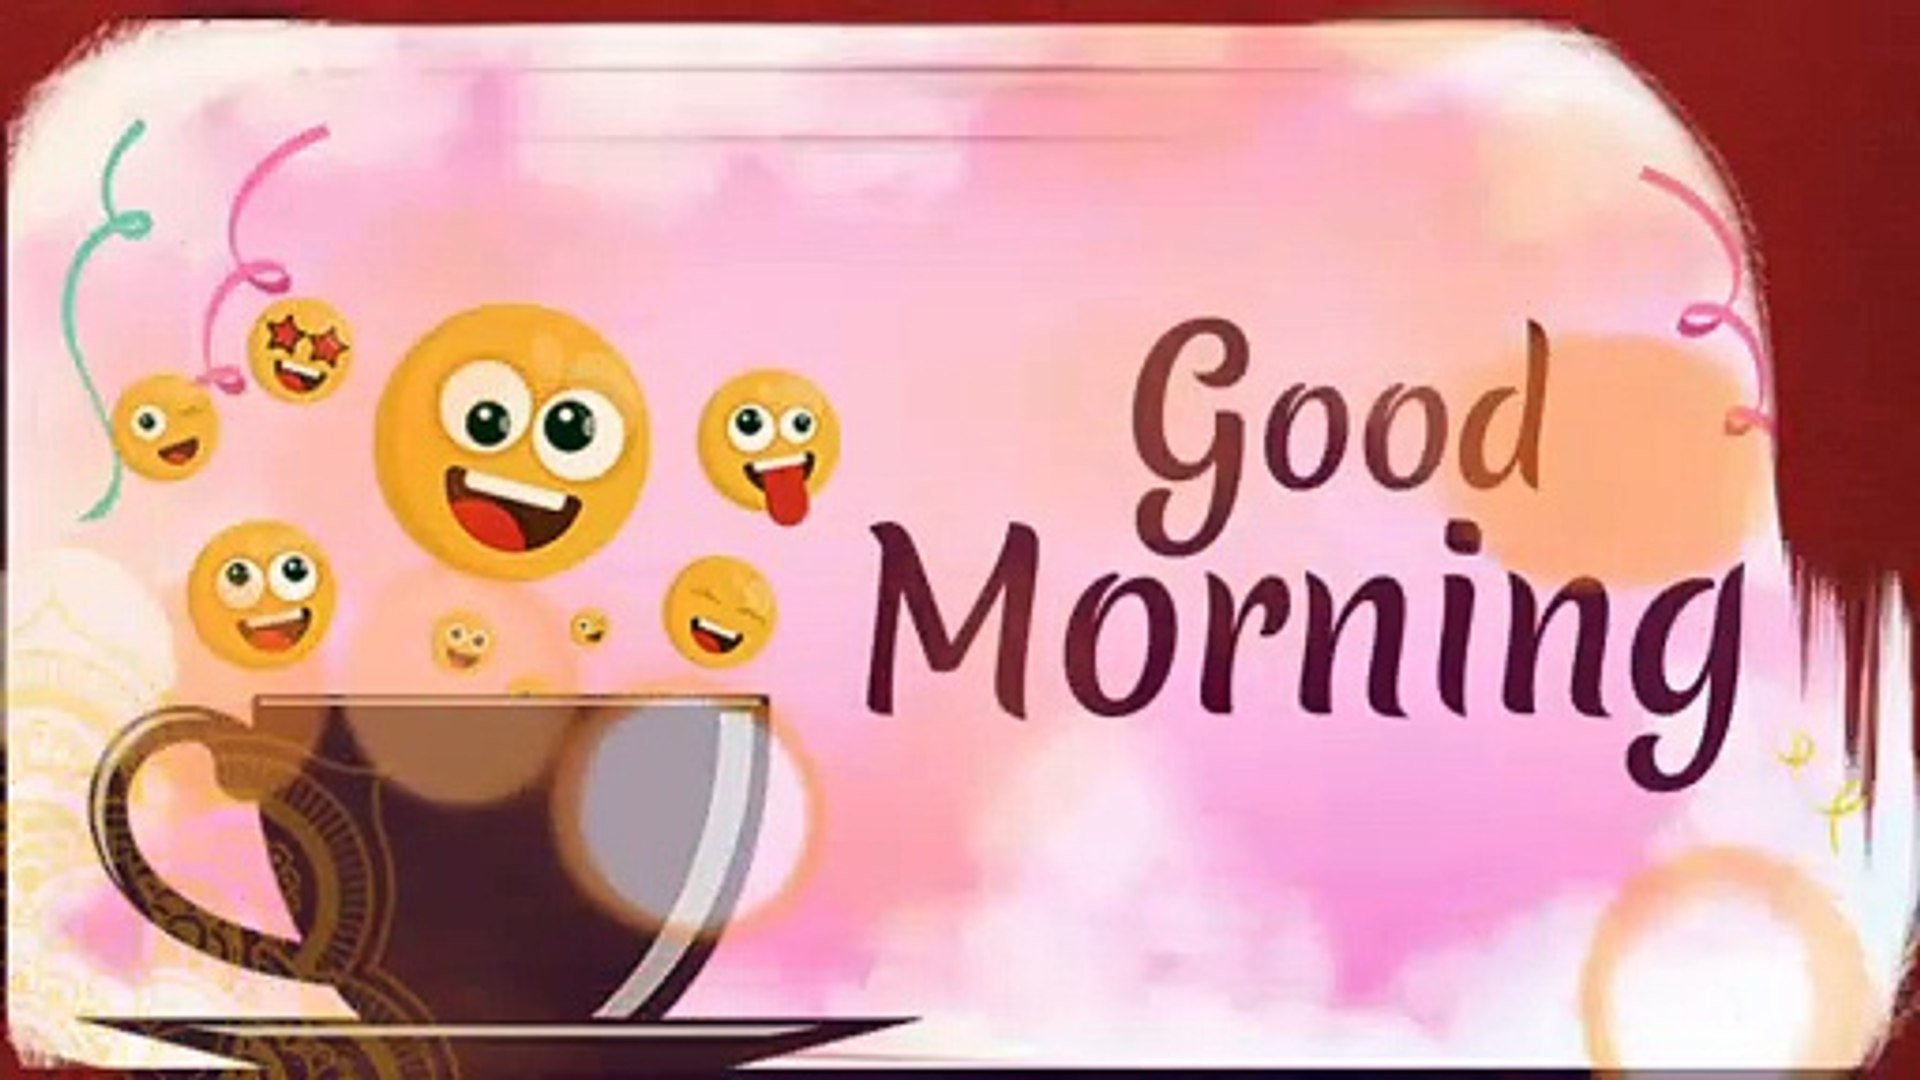 Funny Good Morning Messages: WhatsApp Images & Greetings To Spread Smiles  On April Fools' Day 2020 - video Dailymotion